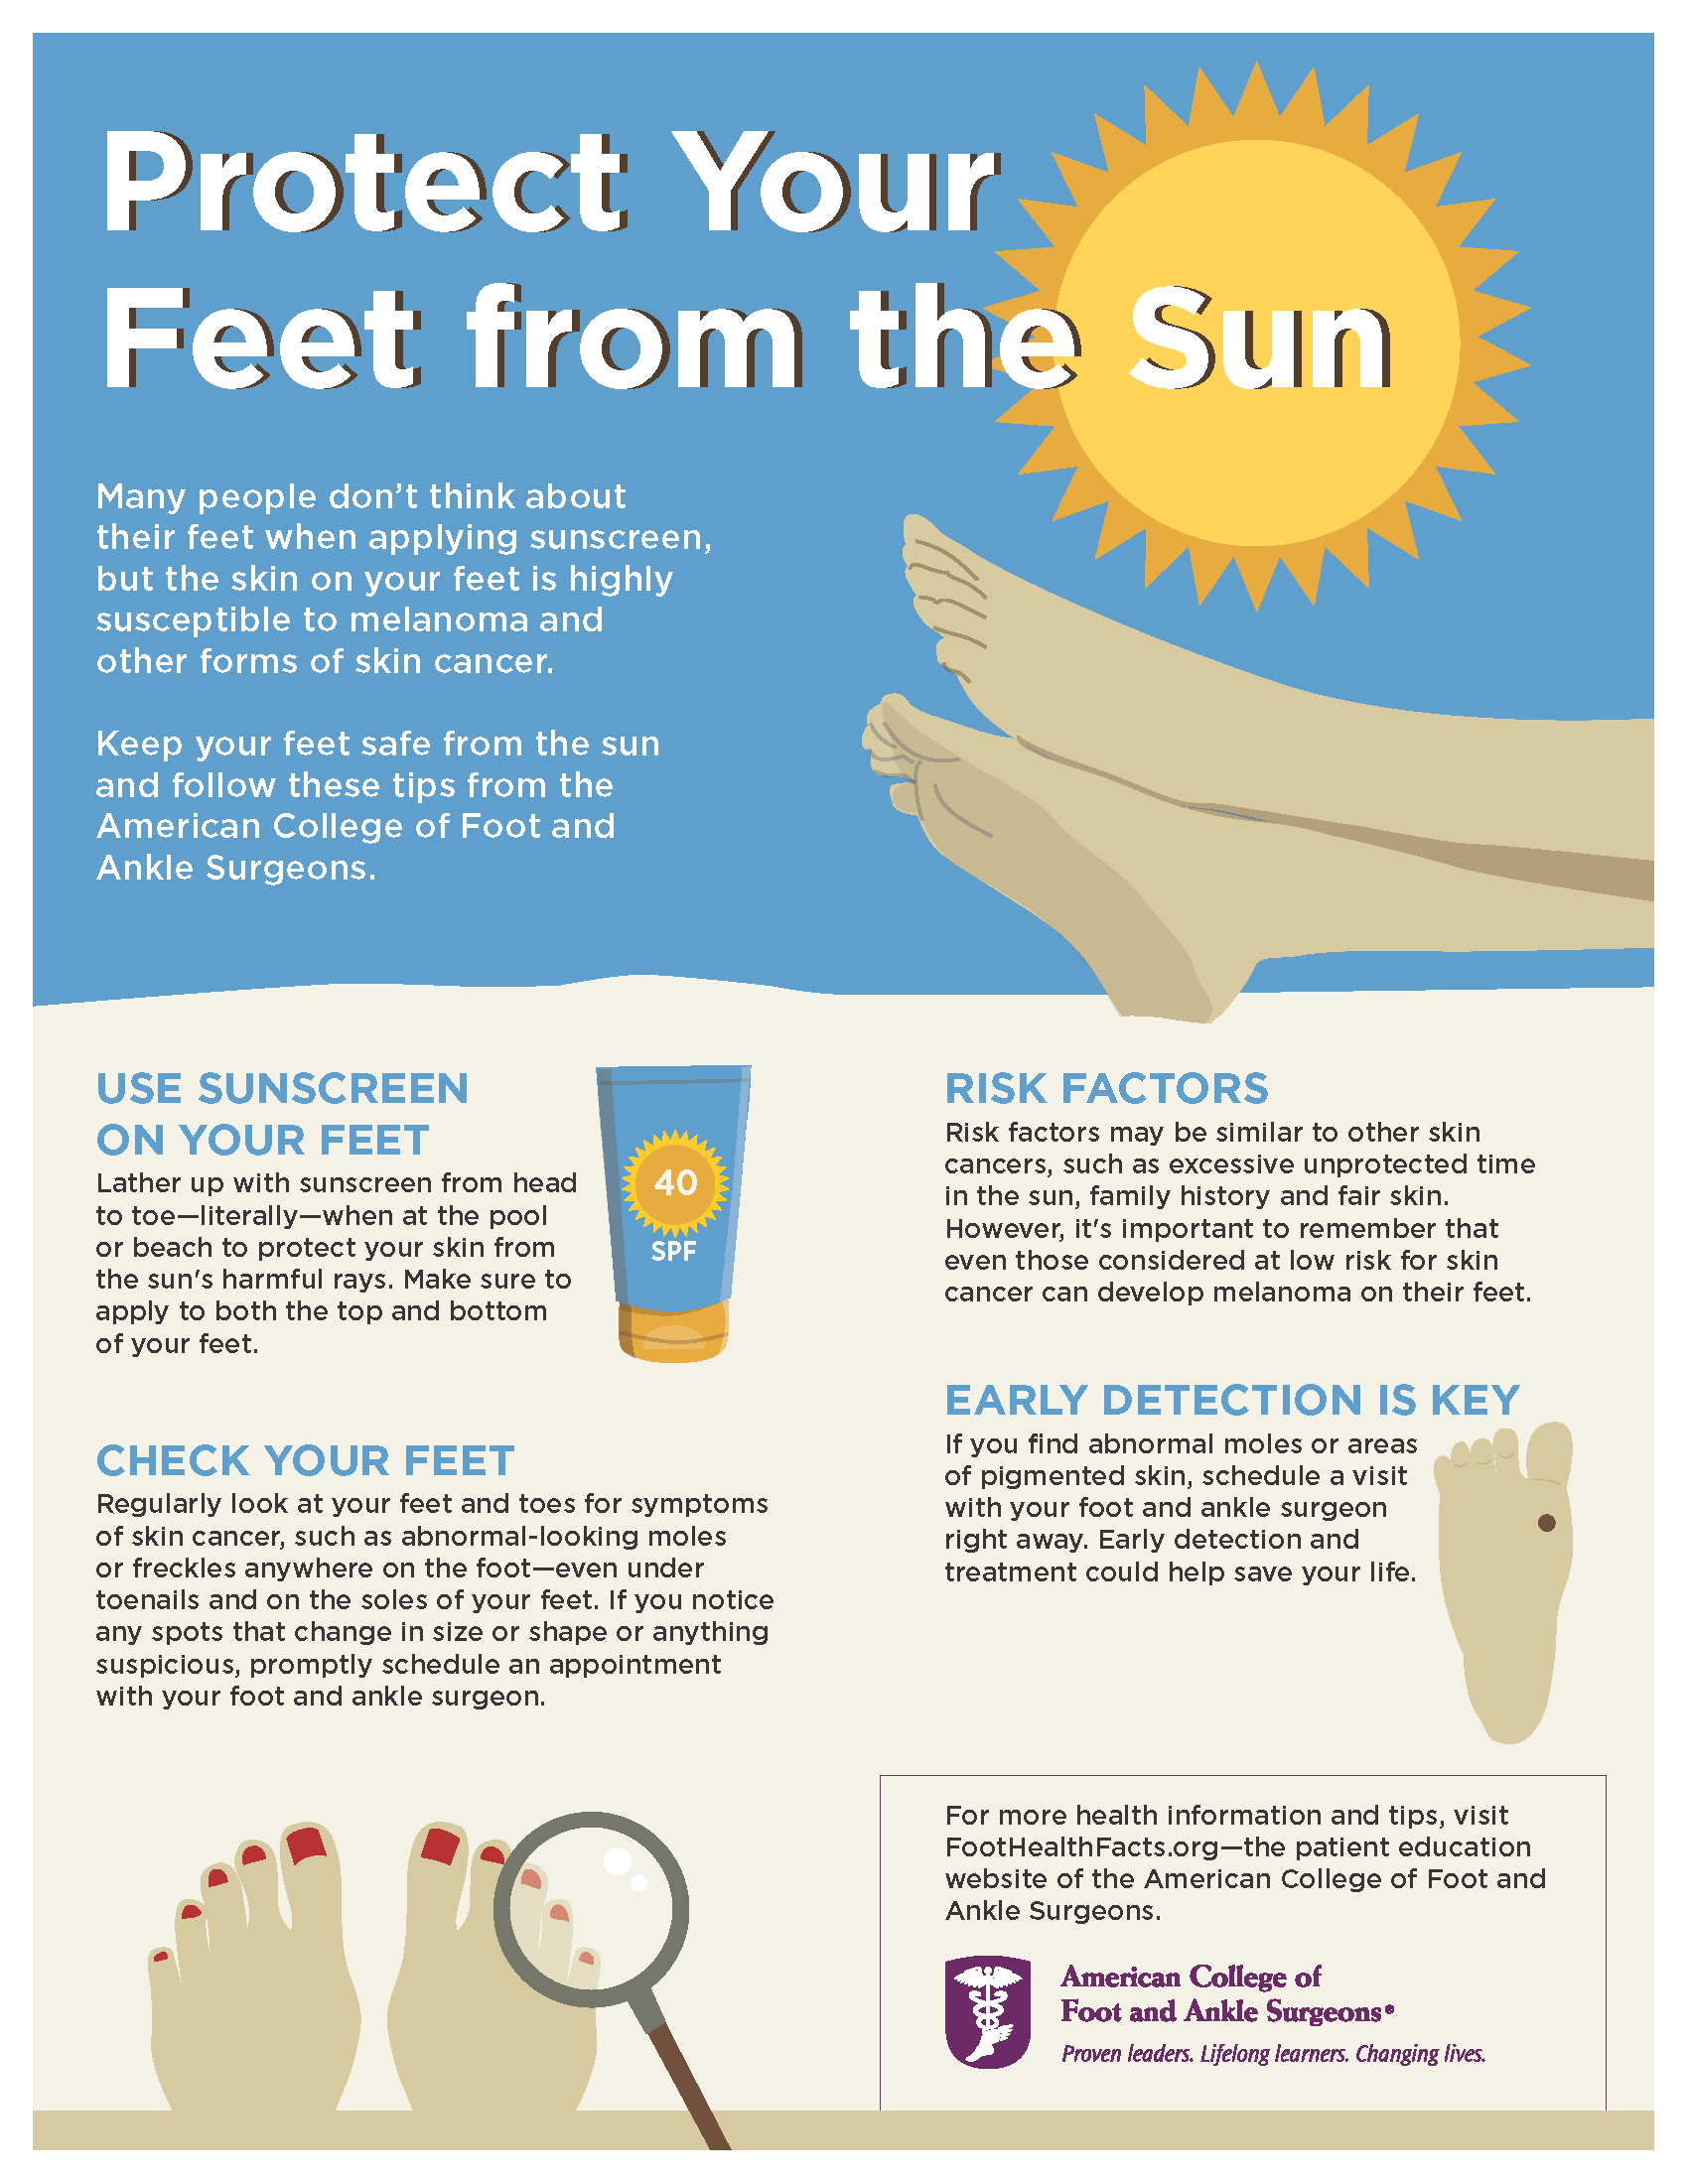 Protect-Your-Feet-from-the-Sun-Infographic-1-17.png